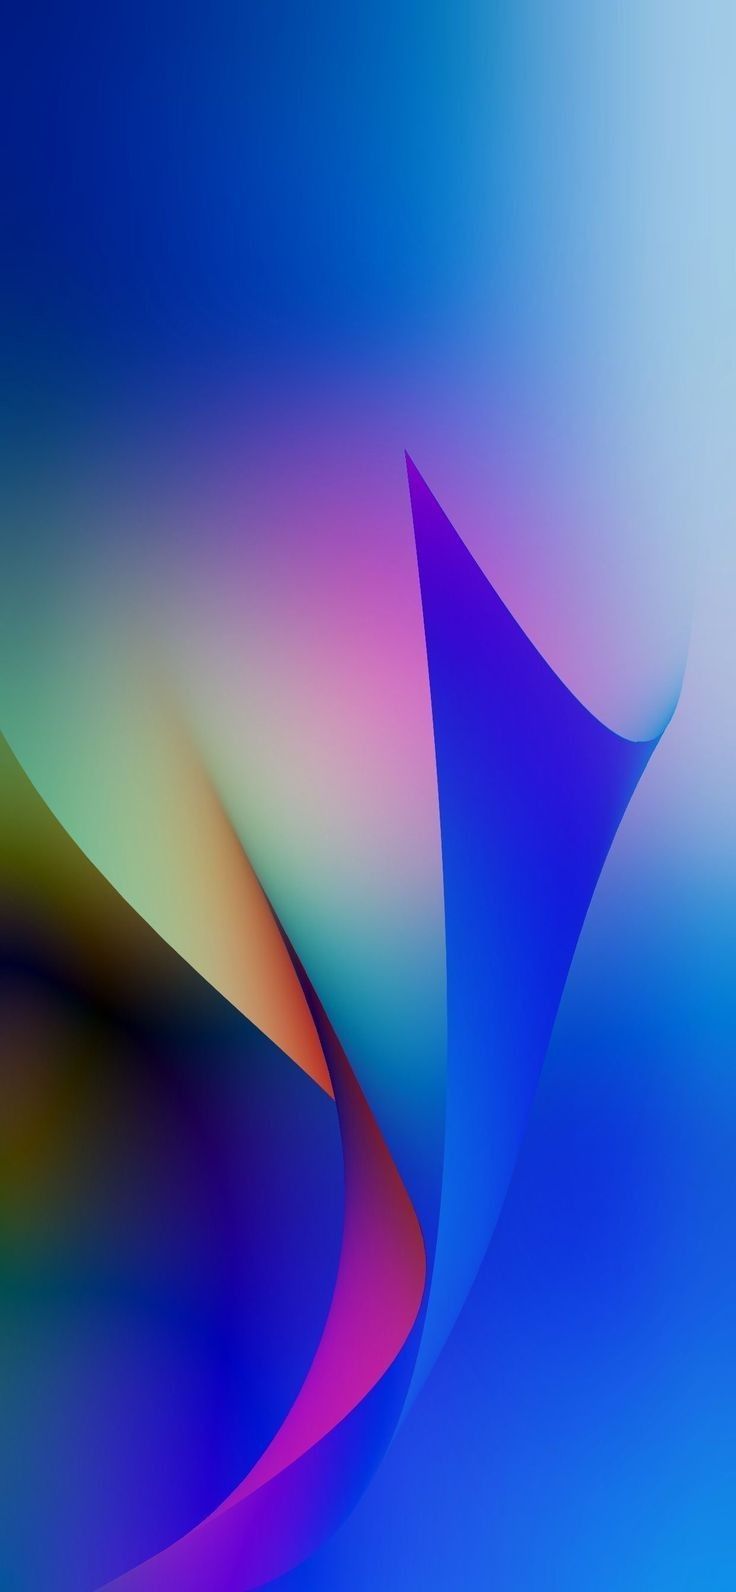 Abstract wallpaper background. Abstract wallpaper background, Happy wallpaper, Apple wallpaper